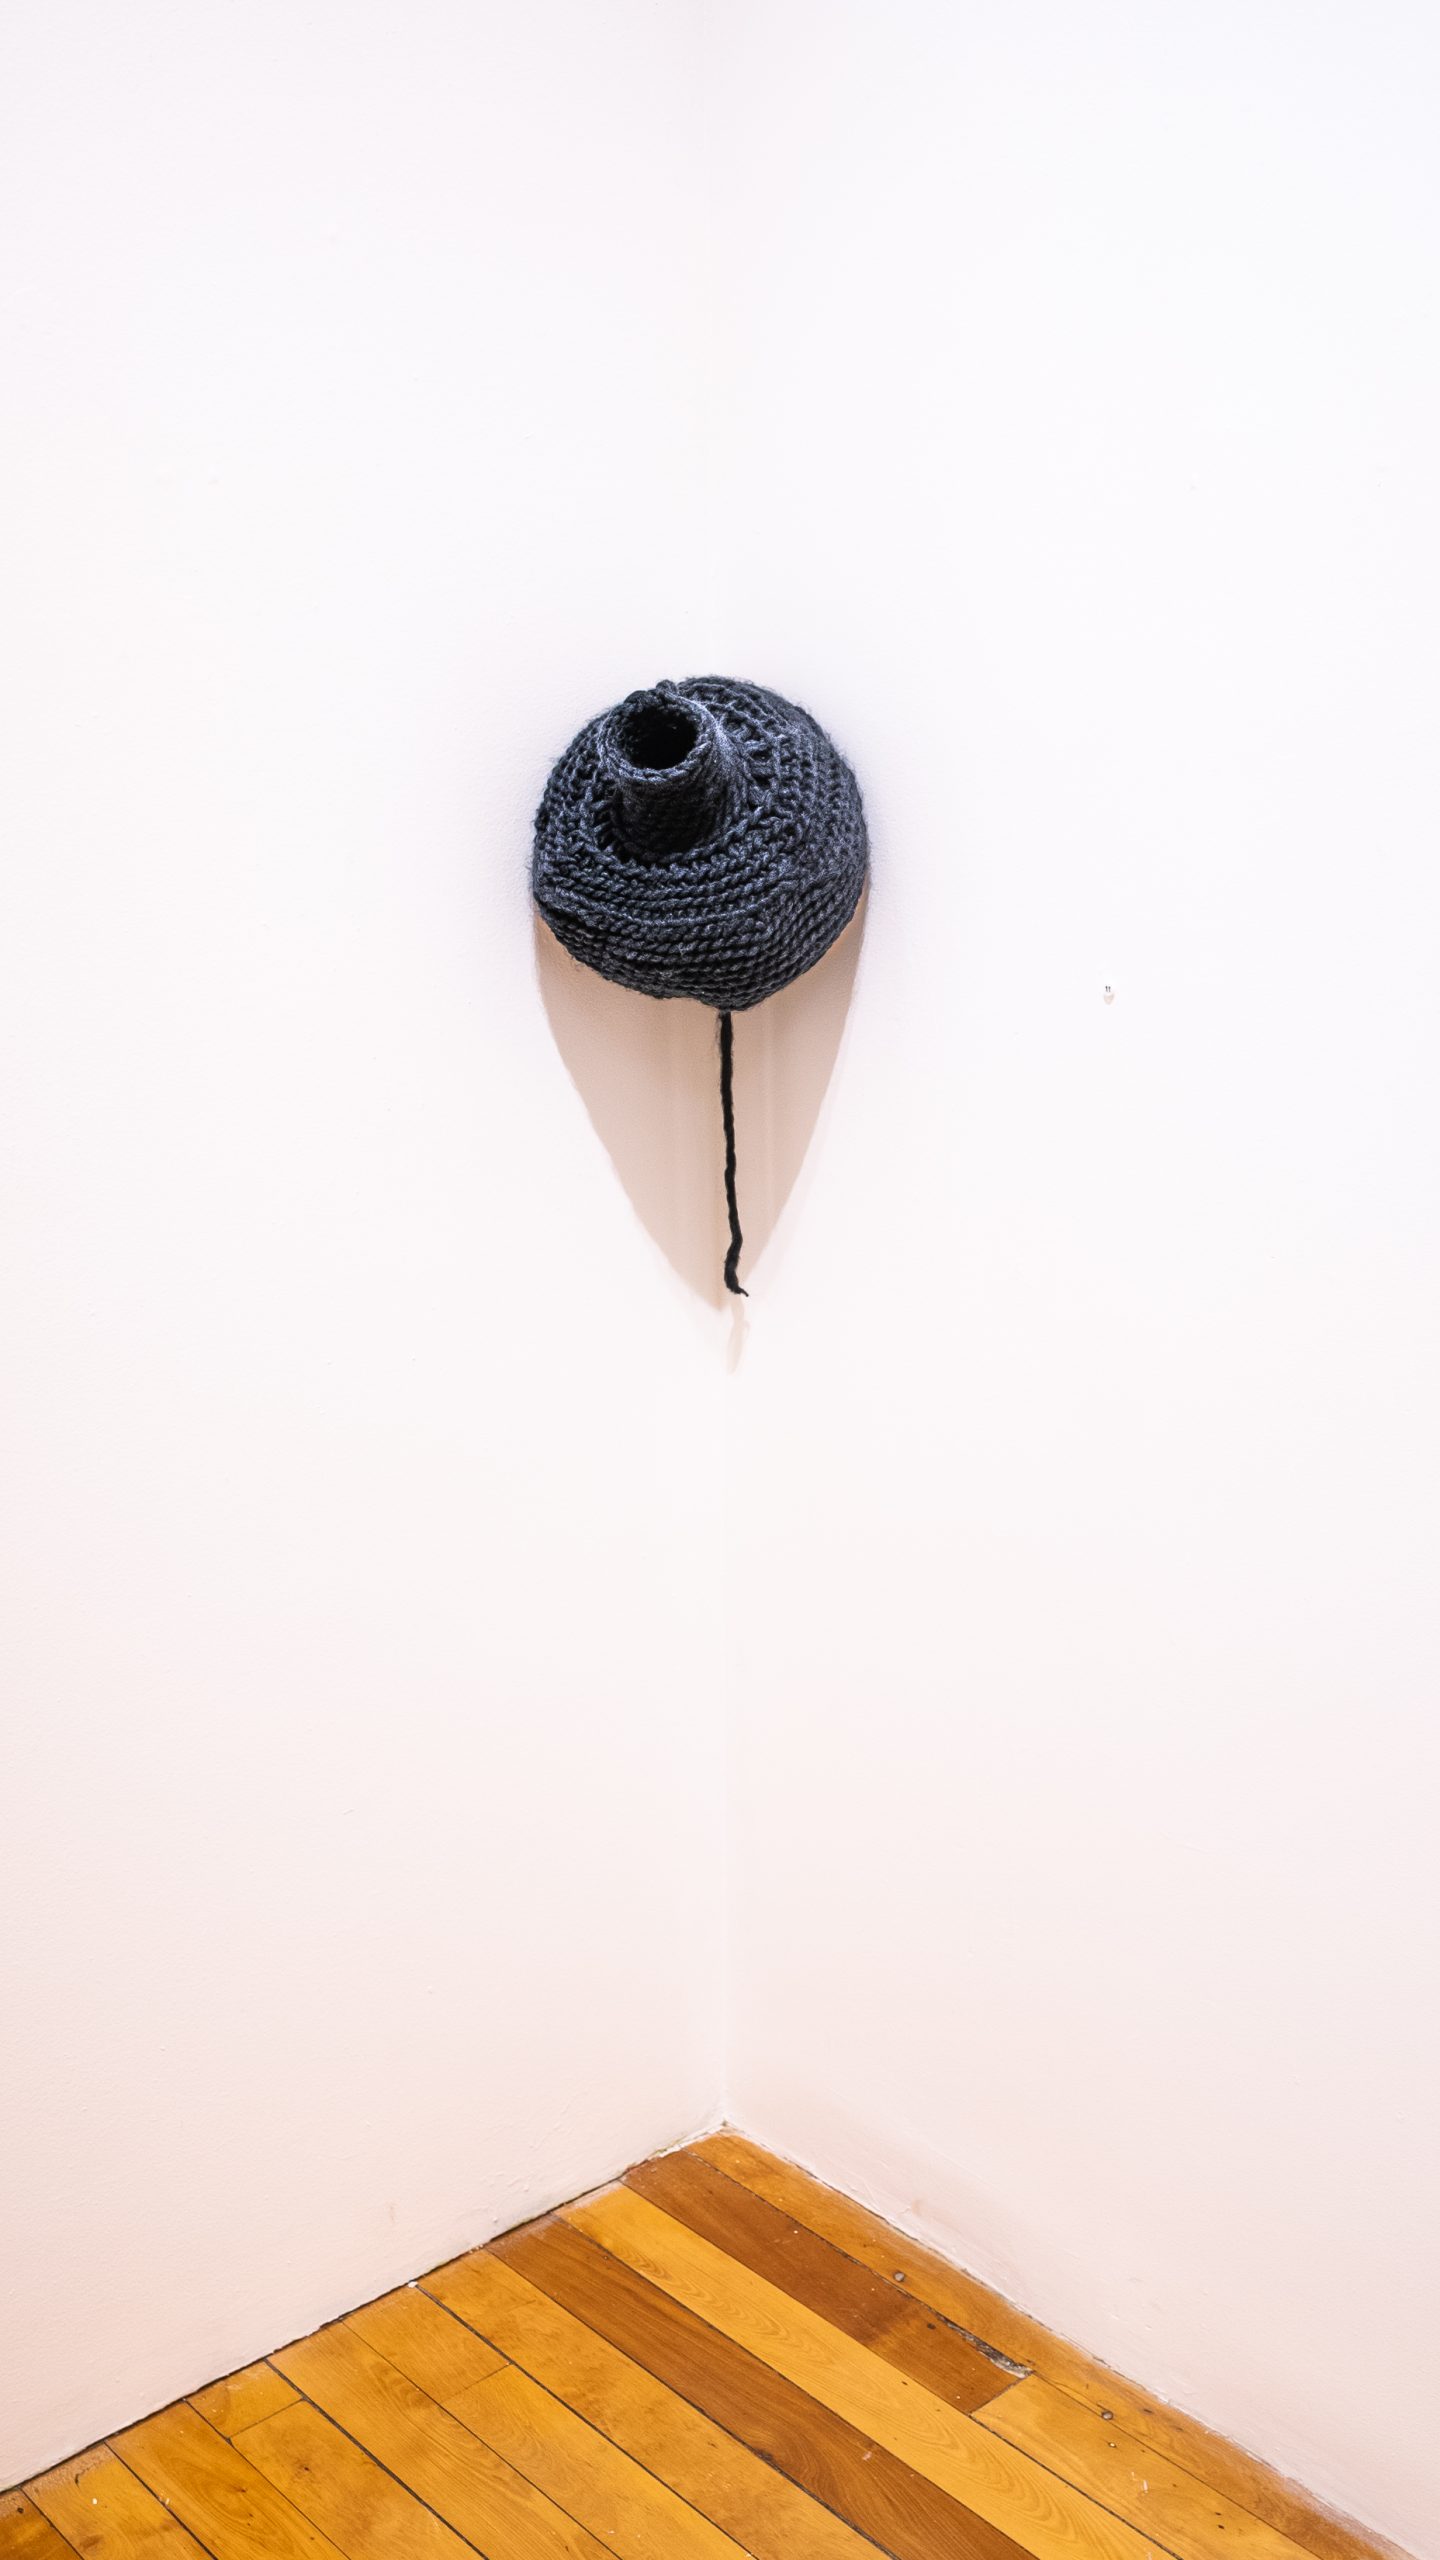 Veronica A. Perez, "autonomy through confinement," 2023. Yarn, artificial hair, 10 in. high x 12 in. wide x 6 in. deep. Part of shadow / echo / memory, University of Southern Maine Art Gallery, 2023.